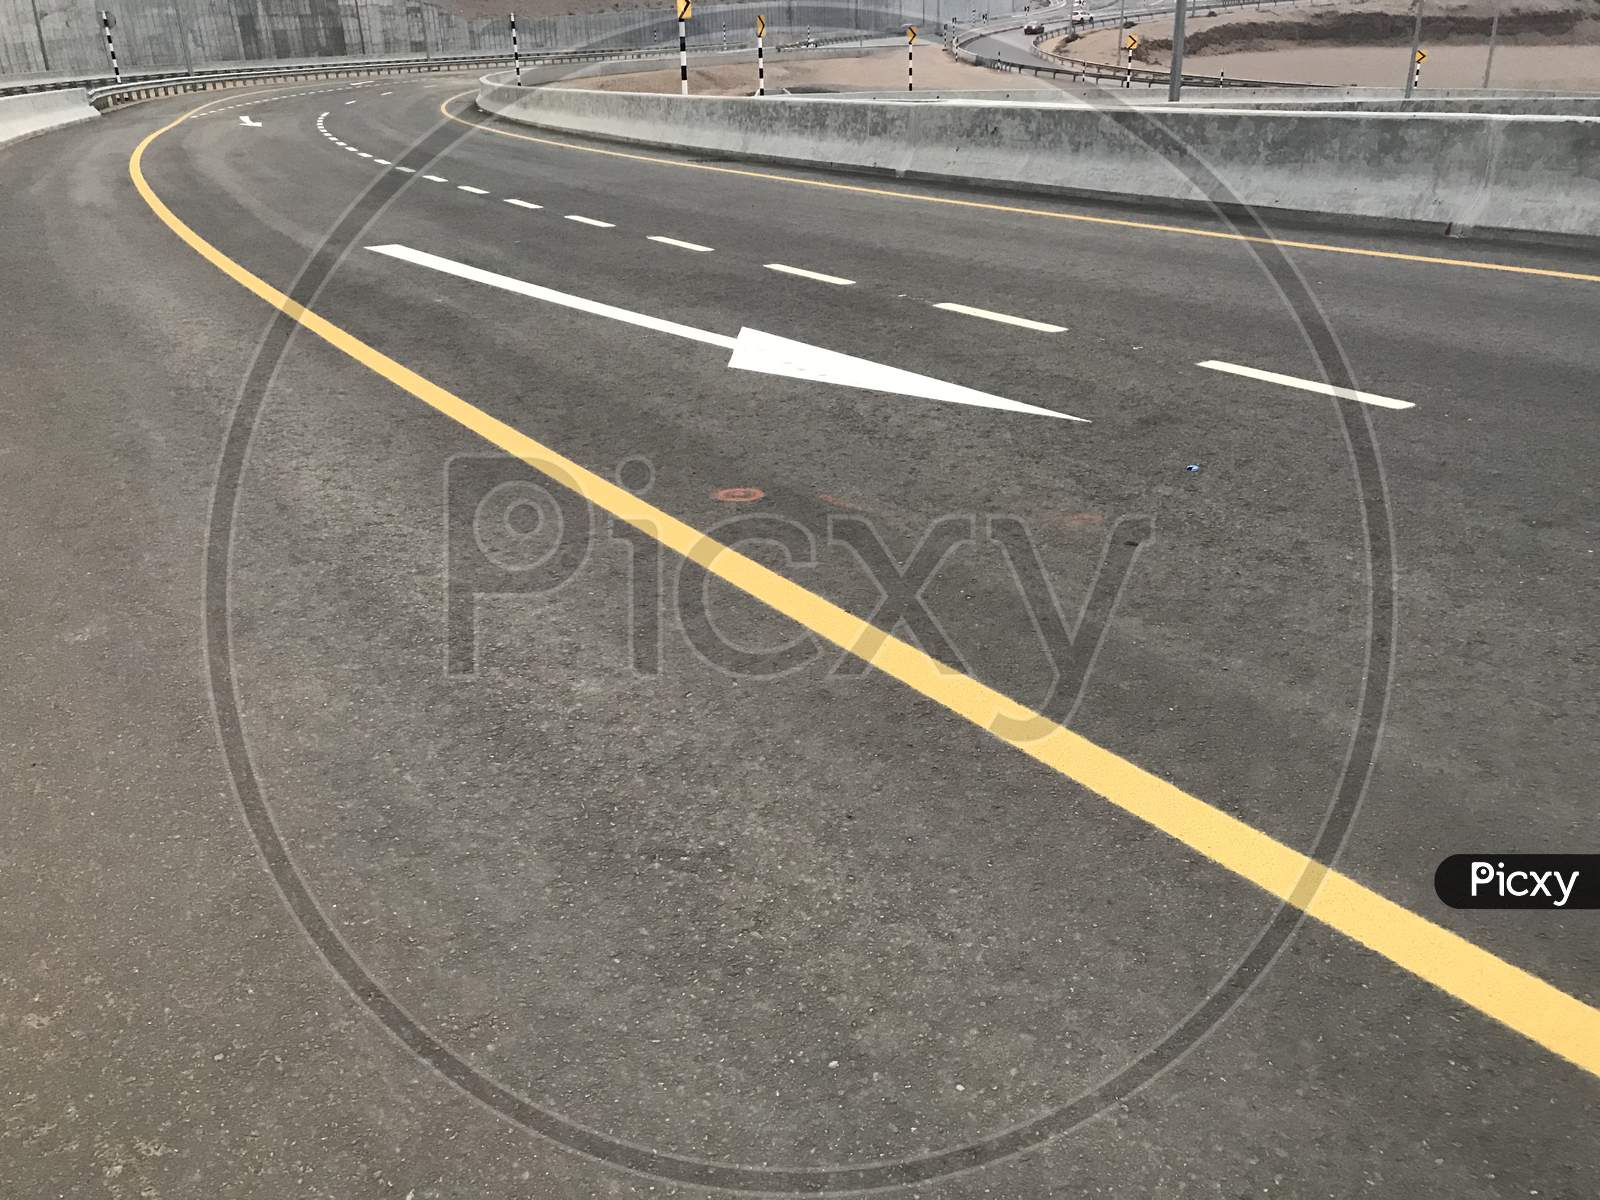 Image Of Tarmac Road Constructed In National Highways With International Standard Marks And Symbols For Both Sides Transport